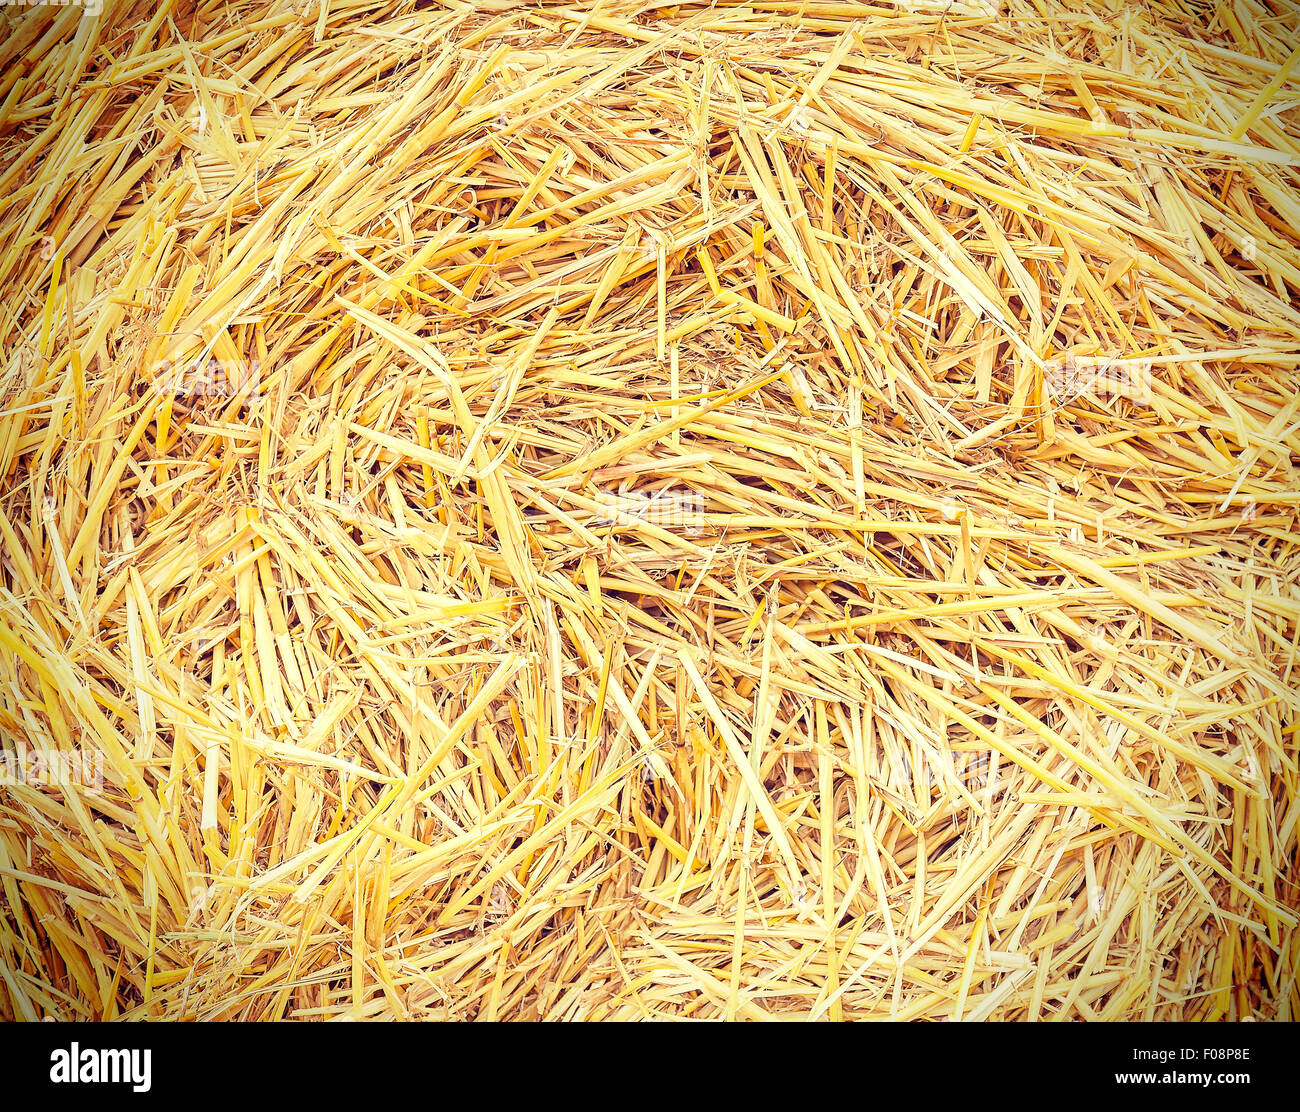 Abstract nature background made of dry straw bale. Stock Photo